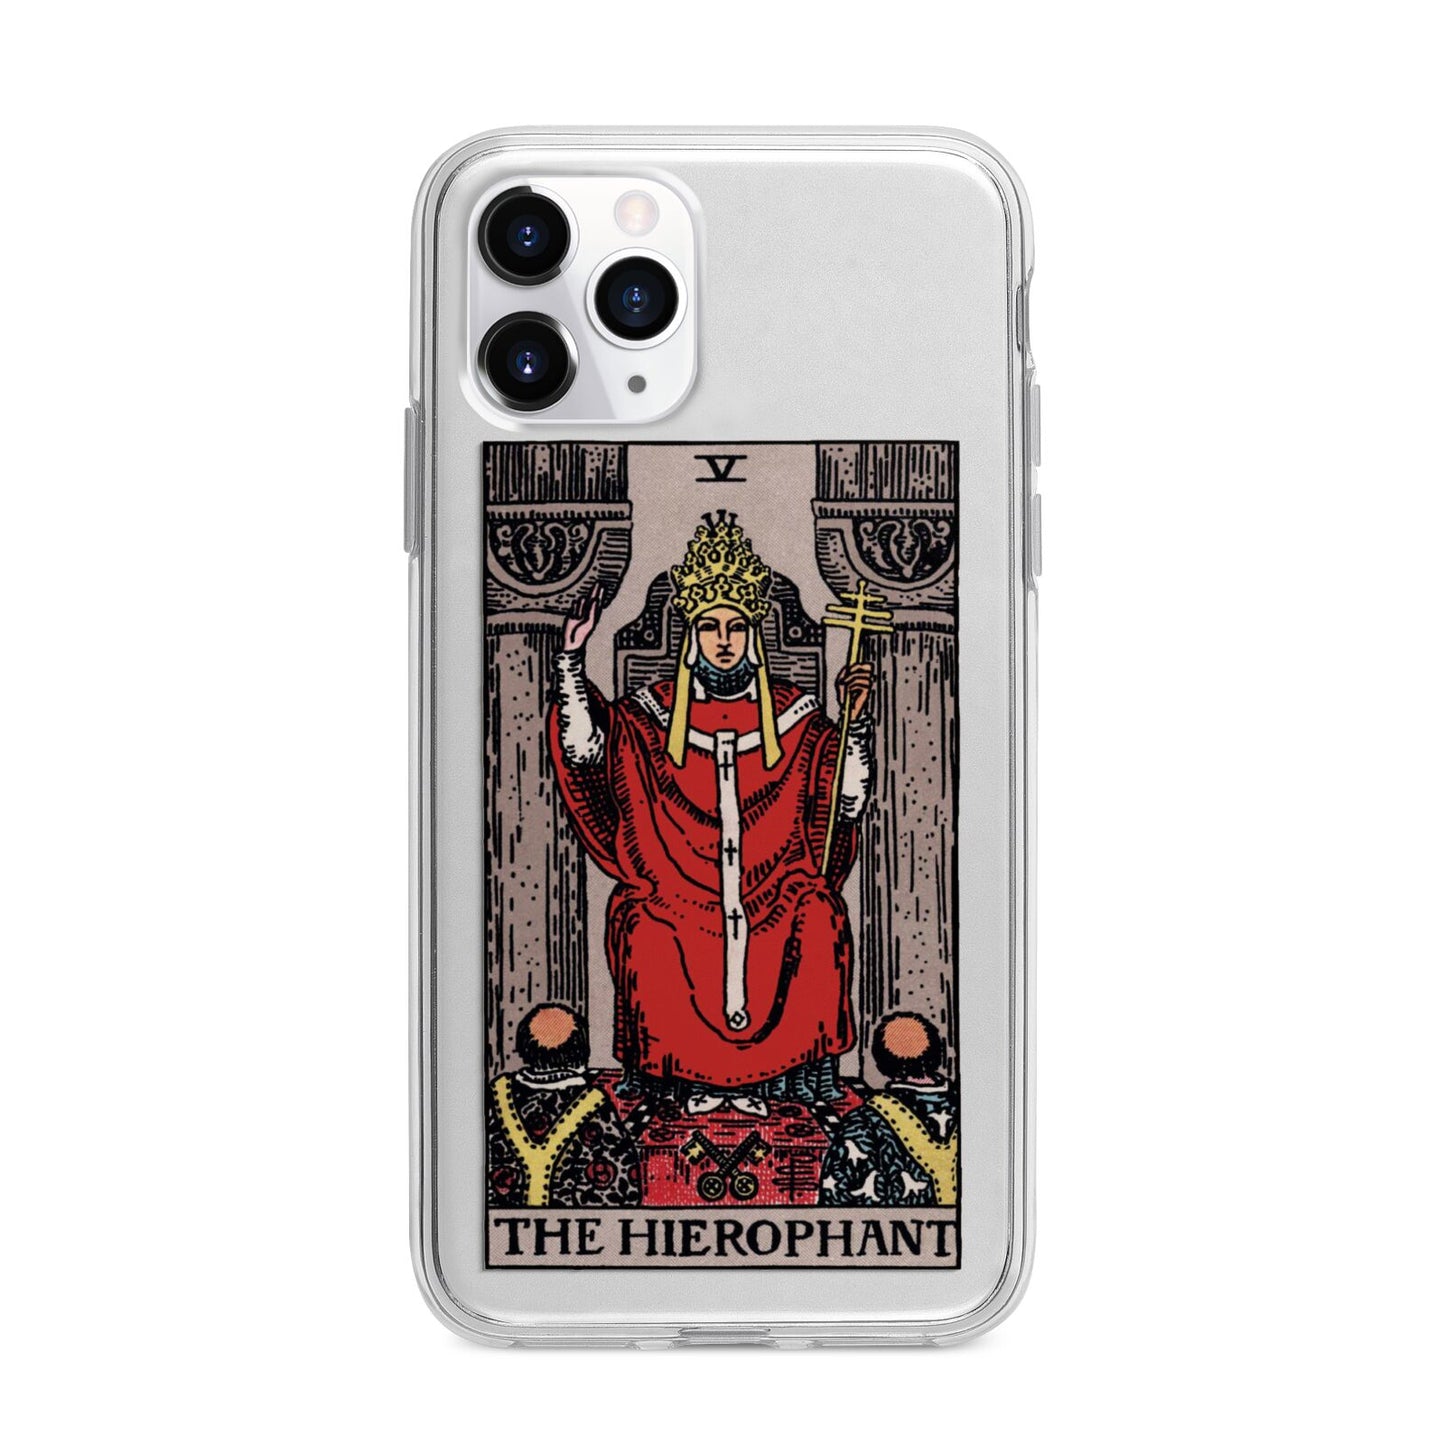 The Hierophant Tarot Card Apple iPhone 11 Pro Max in Silver with Bumper Case